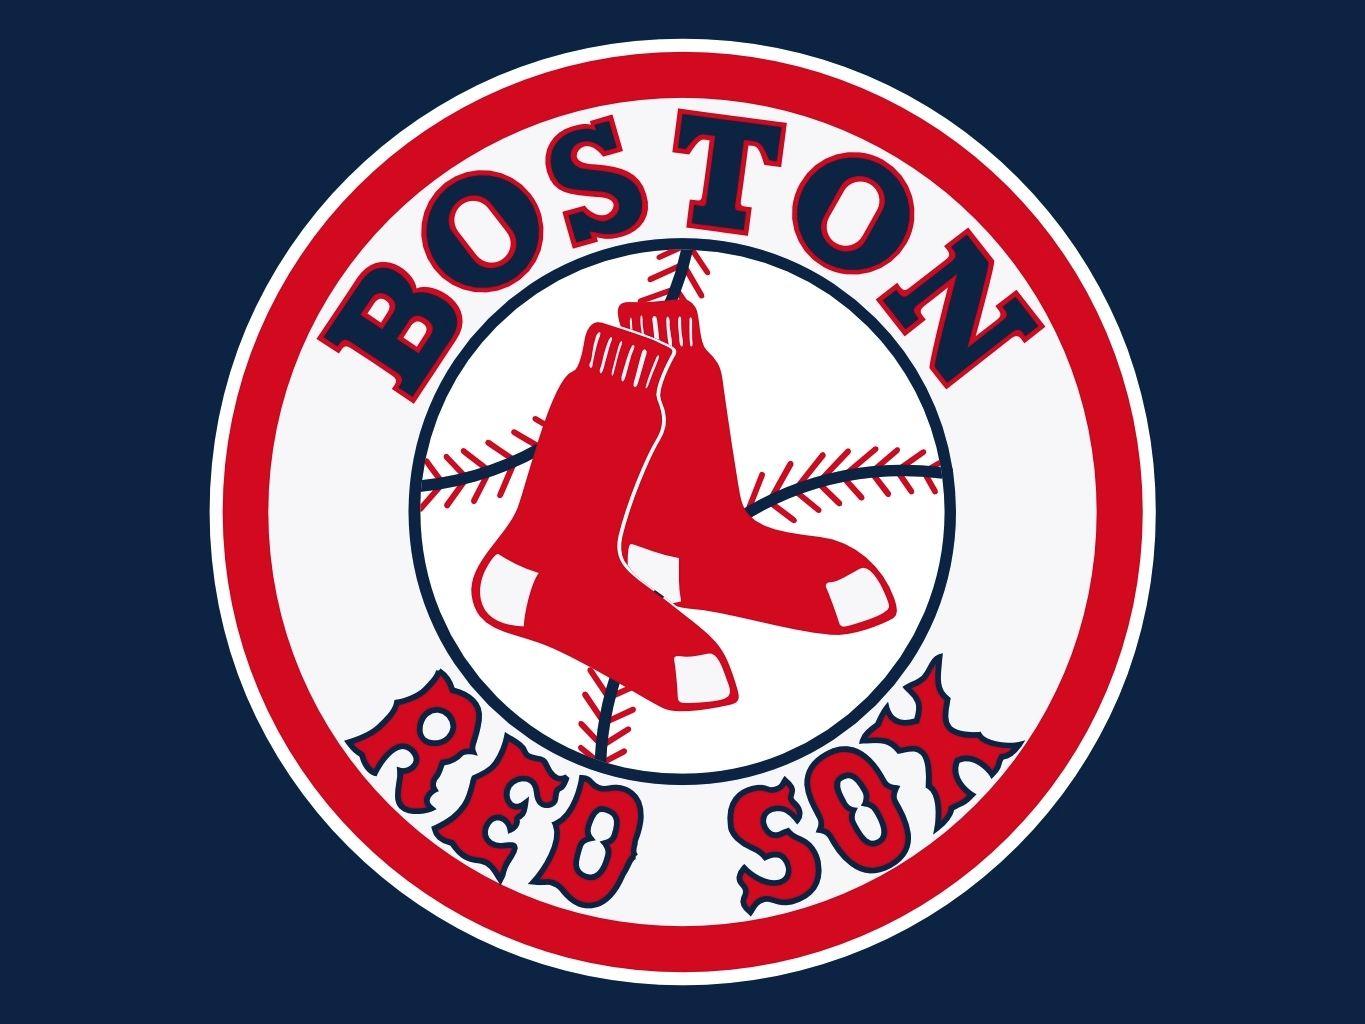 Charitybuzz: Enjoy an Unbelievable Boston Red Sox 2013 Experience